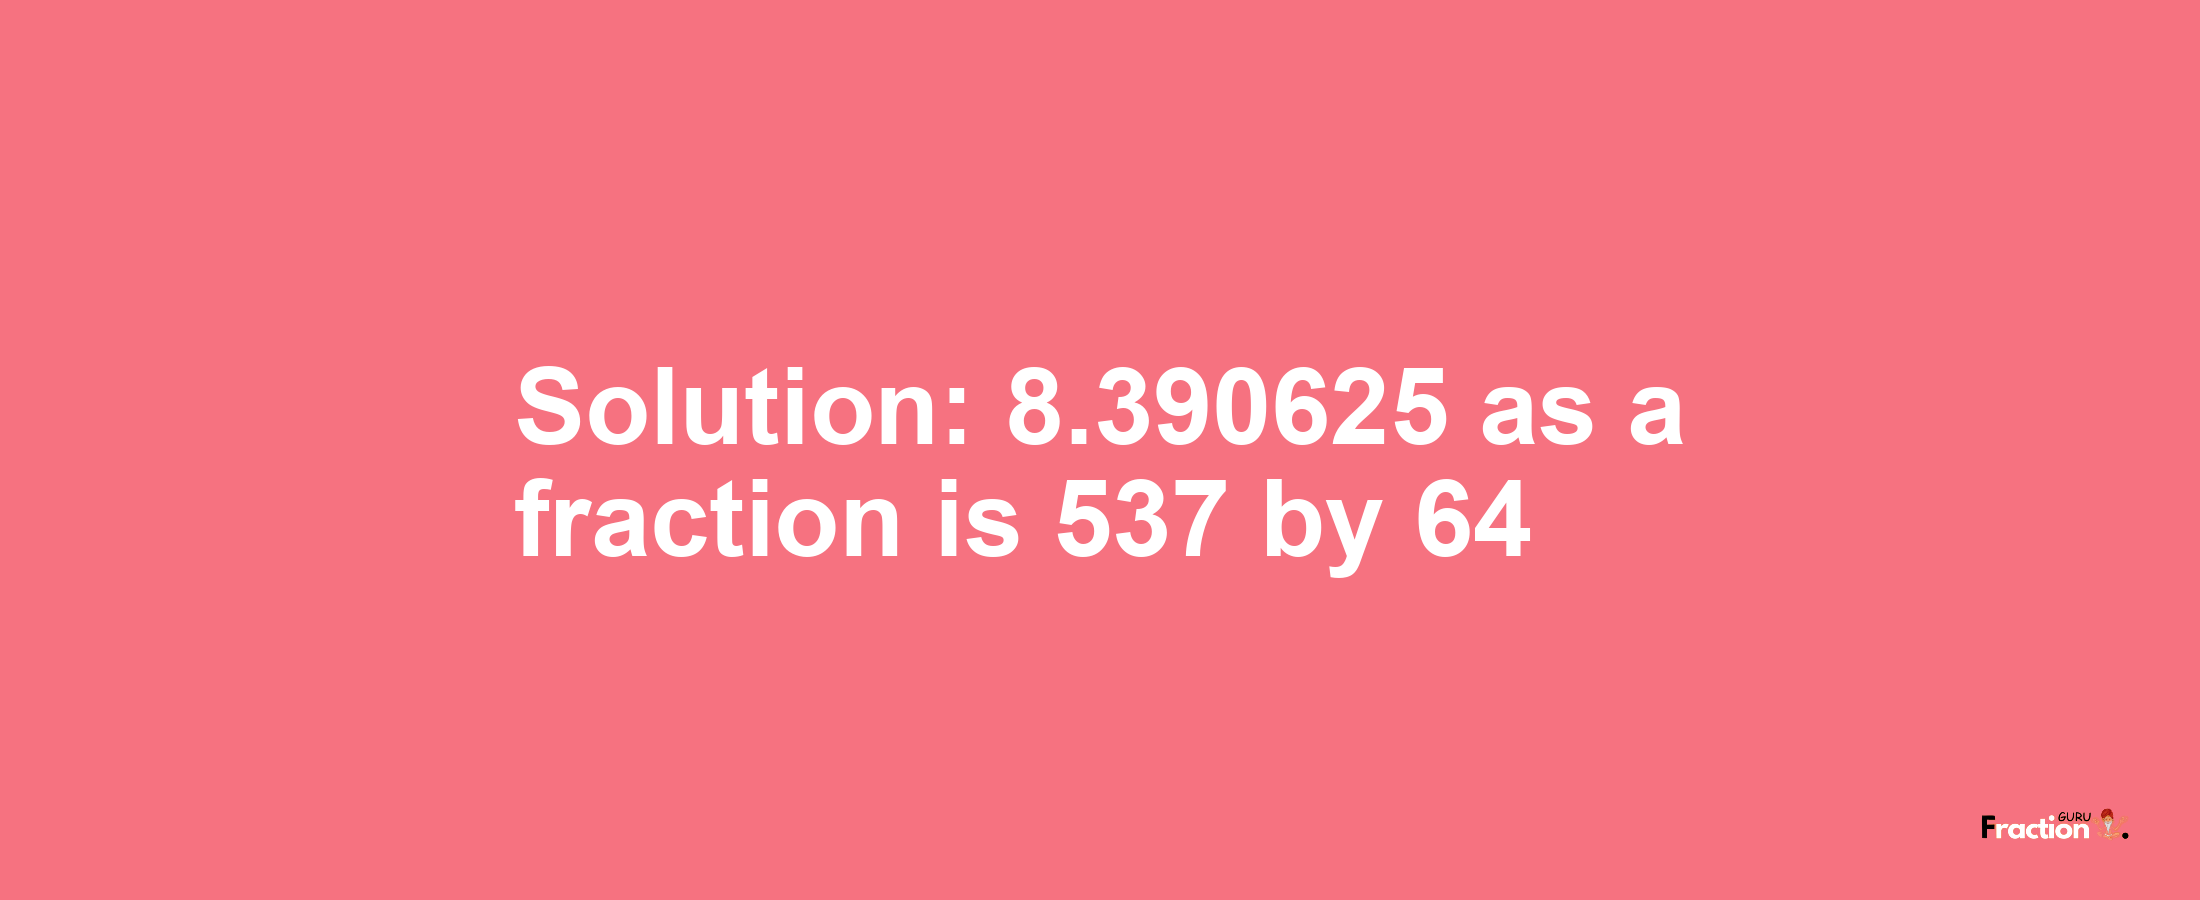 Solution:8.390625 as a fraction is 537/64